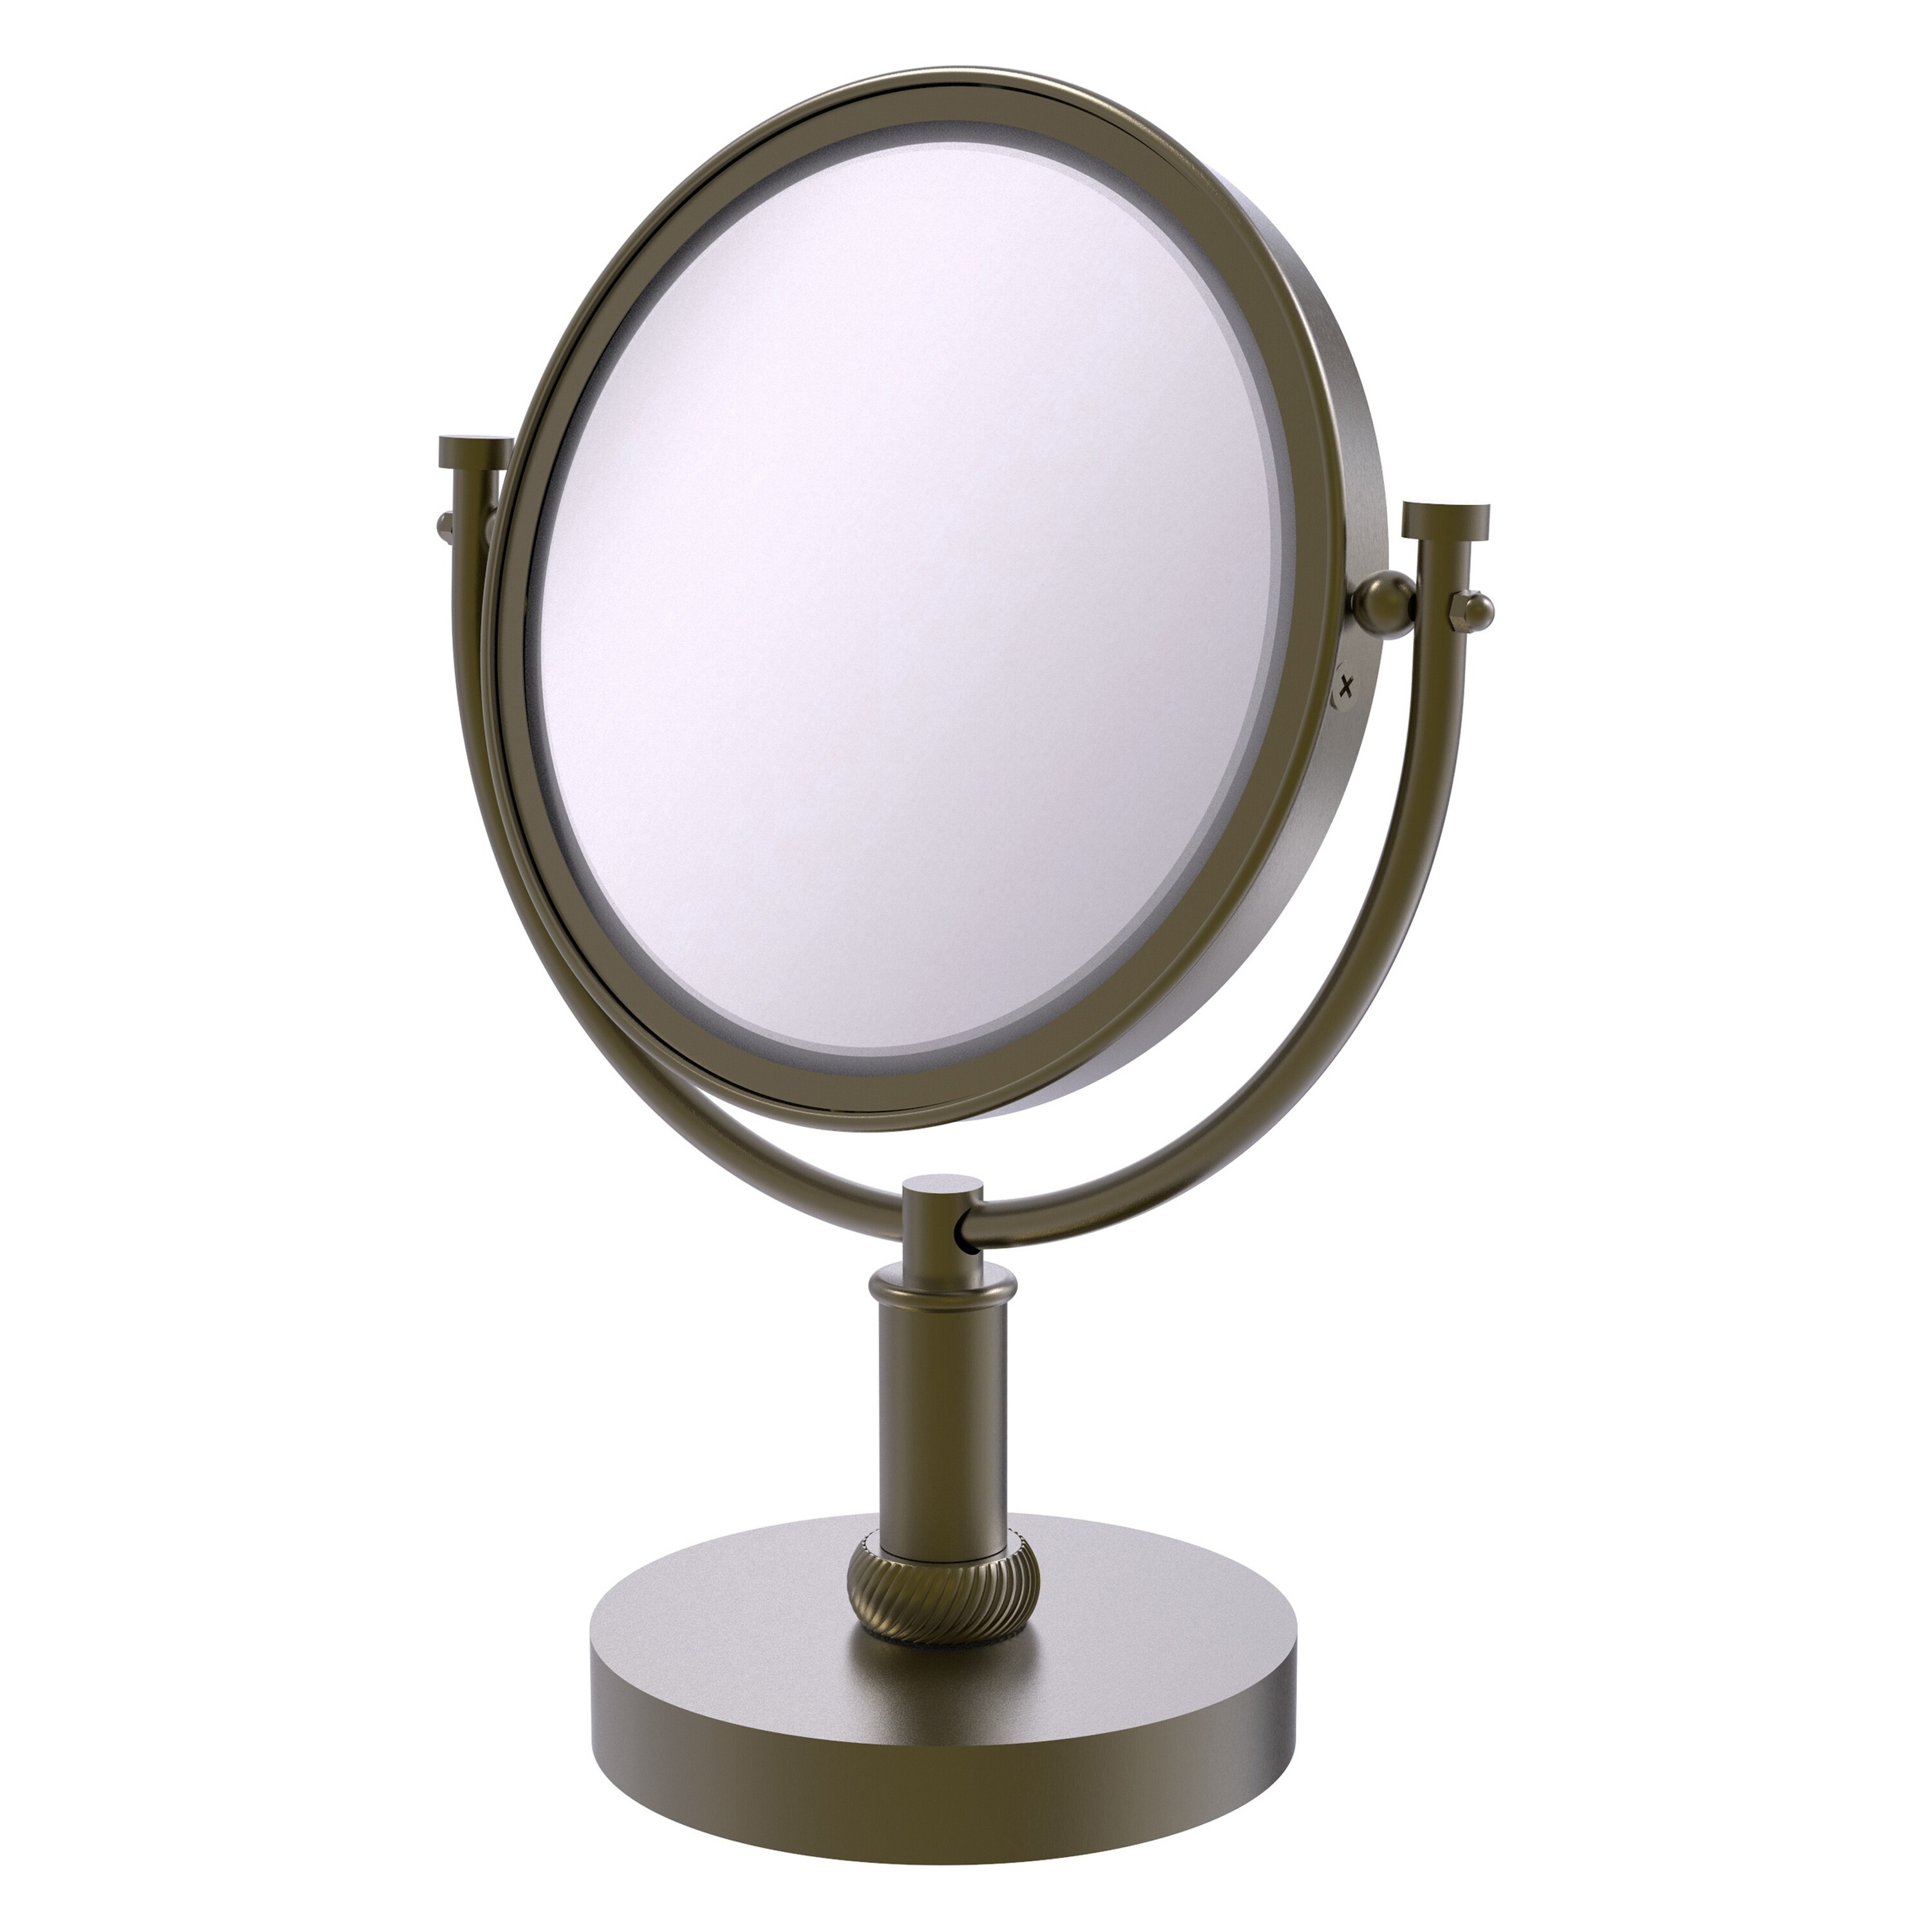 8-in x 15-in Antique Gold Double-sided 5X Magnifying Countertop Vanity Mirror | - Allied Brass DM-4T/4X-ABR